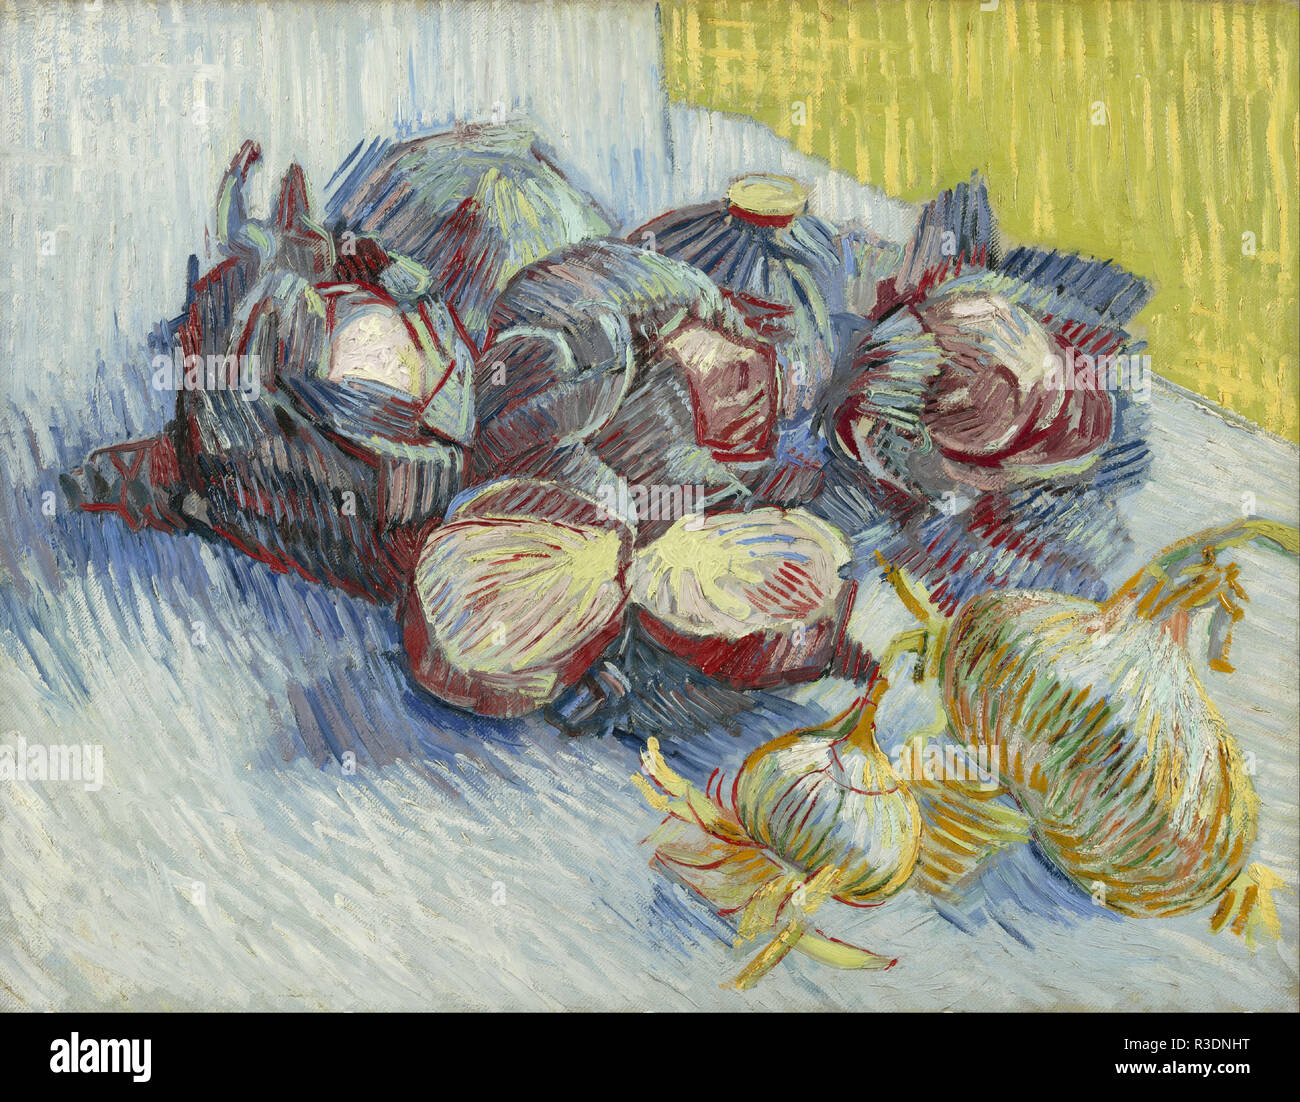 Red cabbages and onions. Date/Period: October 1887 - November 1887. Painting. Oil on canvas. Author: VINCENT VAN GOGH. VAN GOGH, VINCENT. Stock Photo